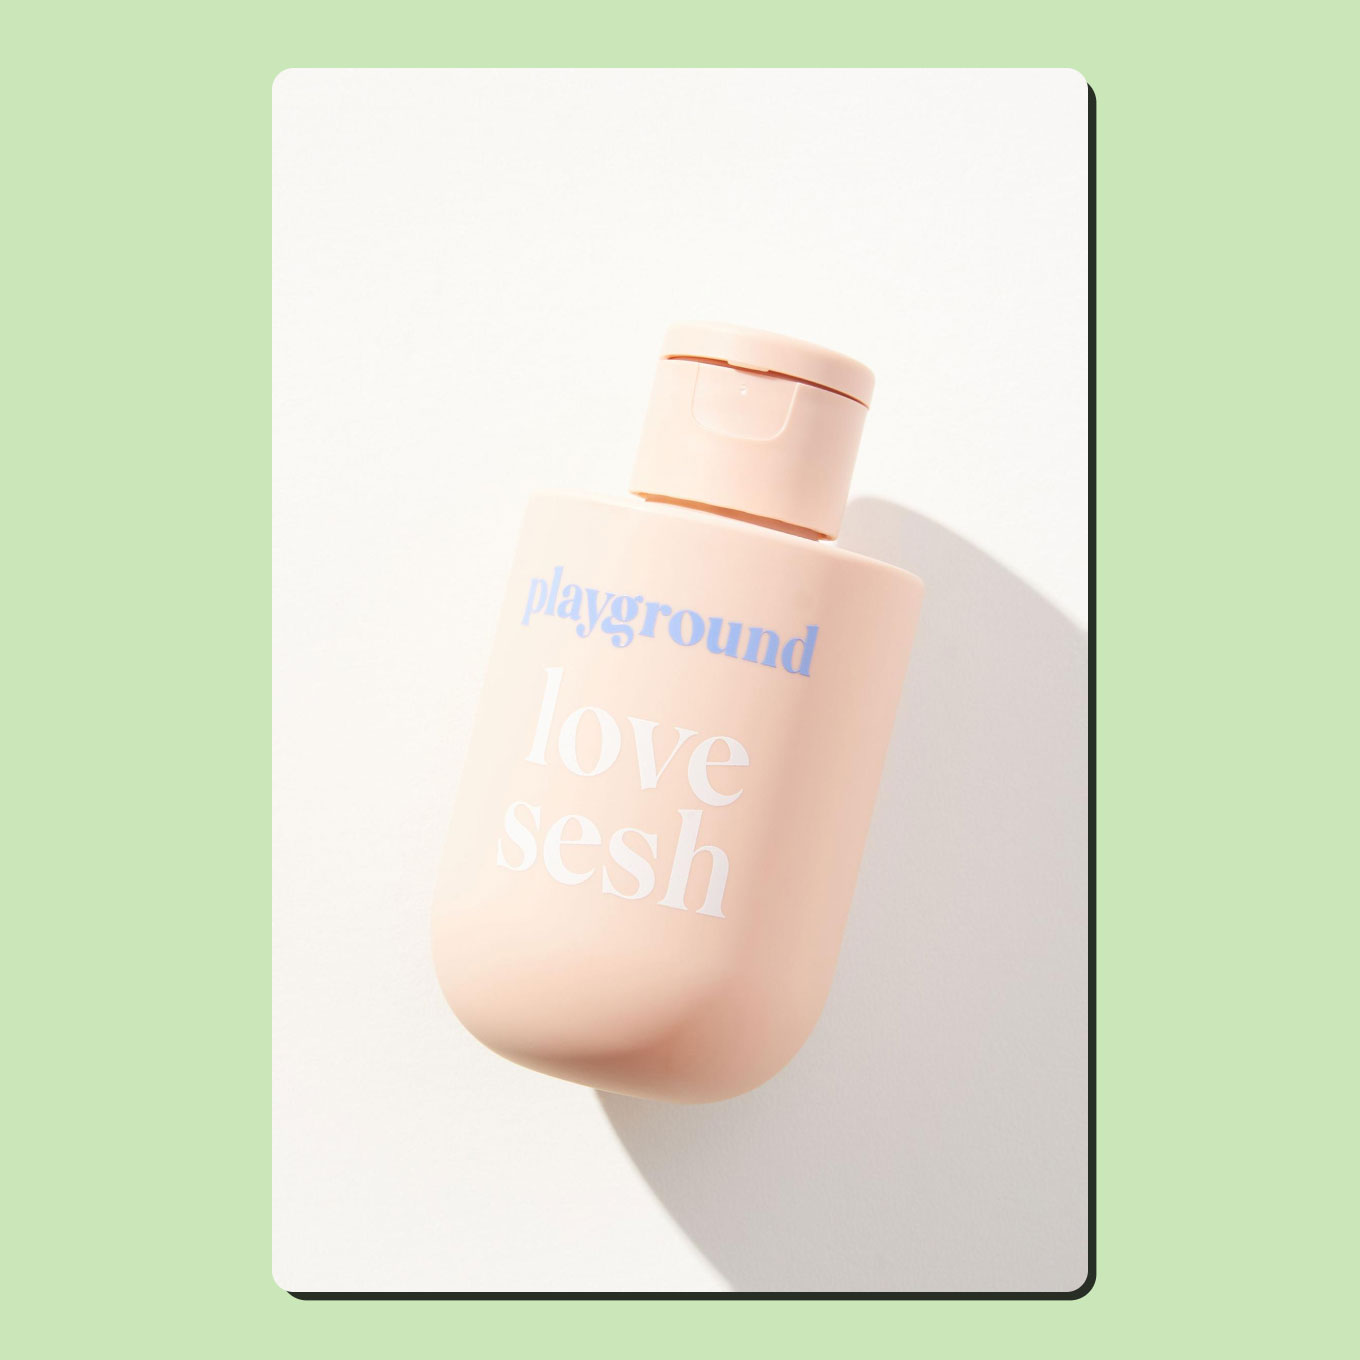 A bottle of Love Sesh by Playground